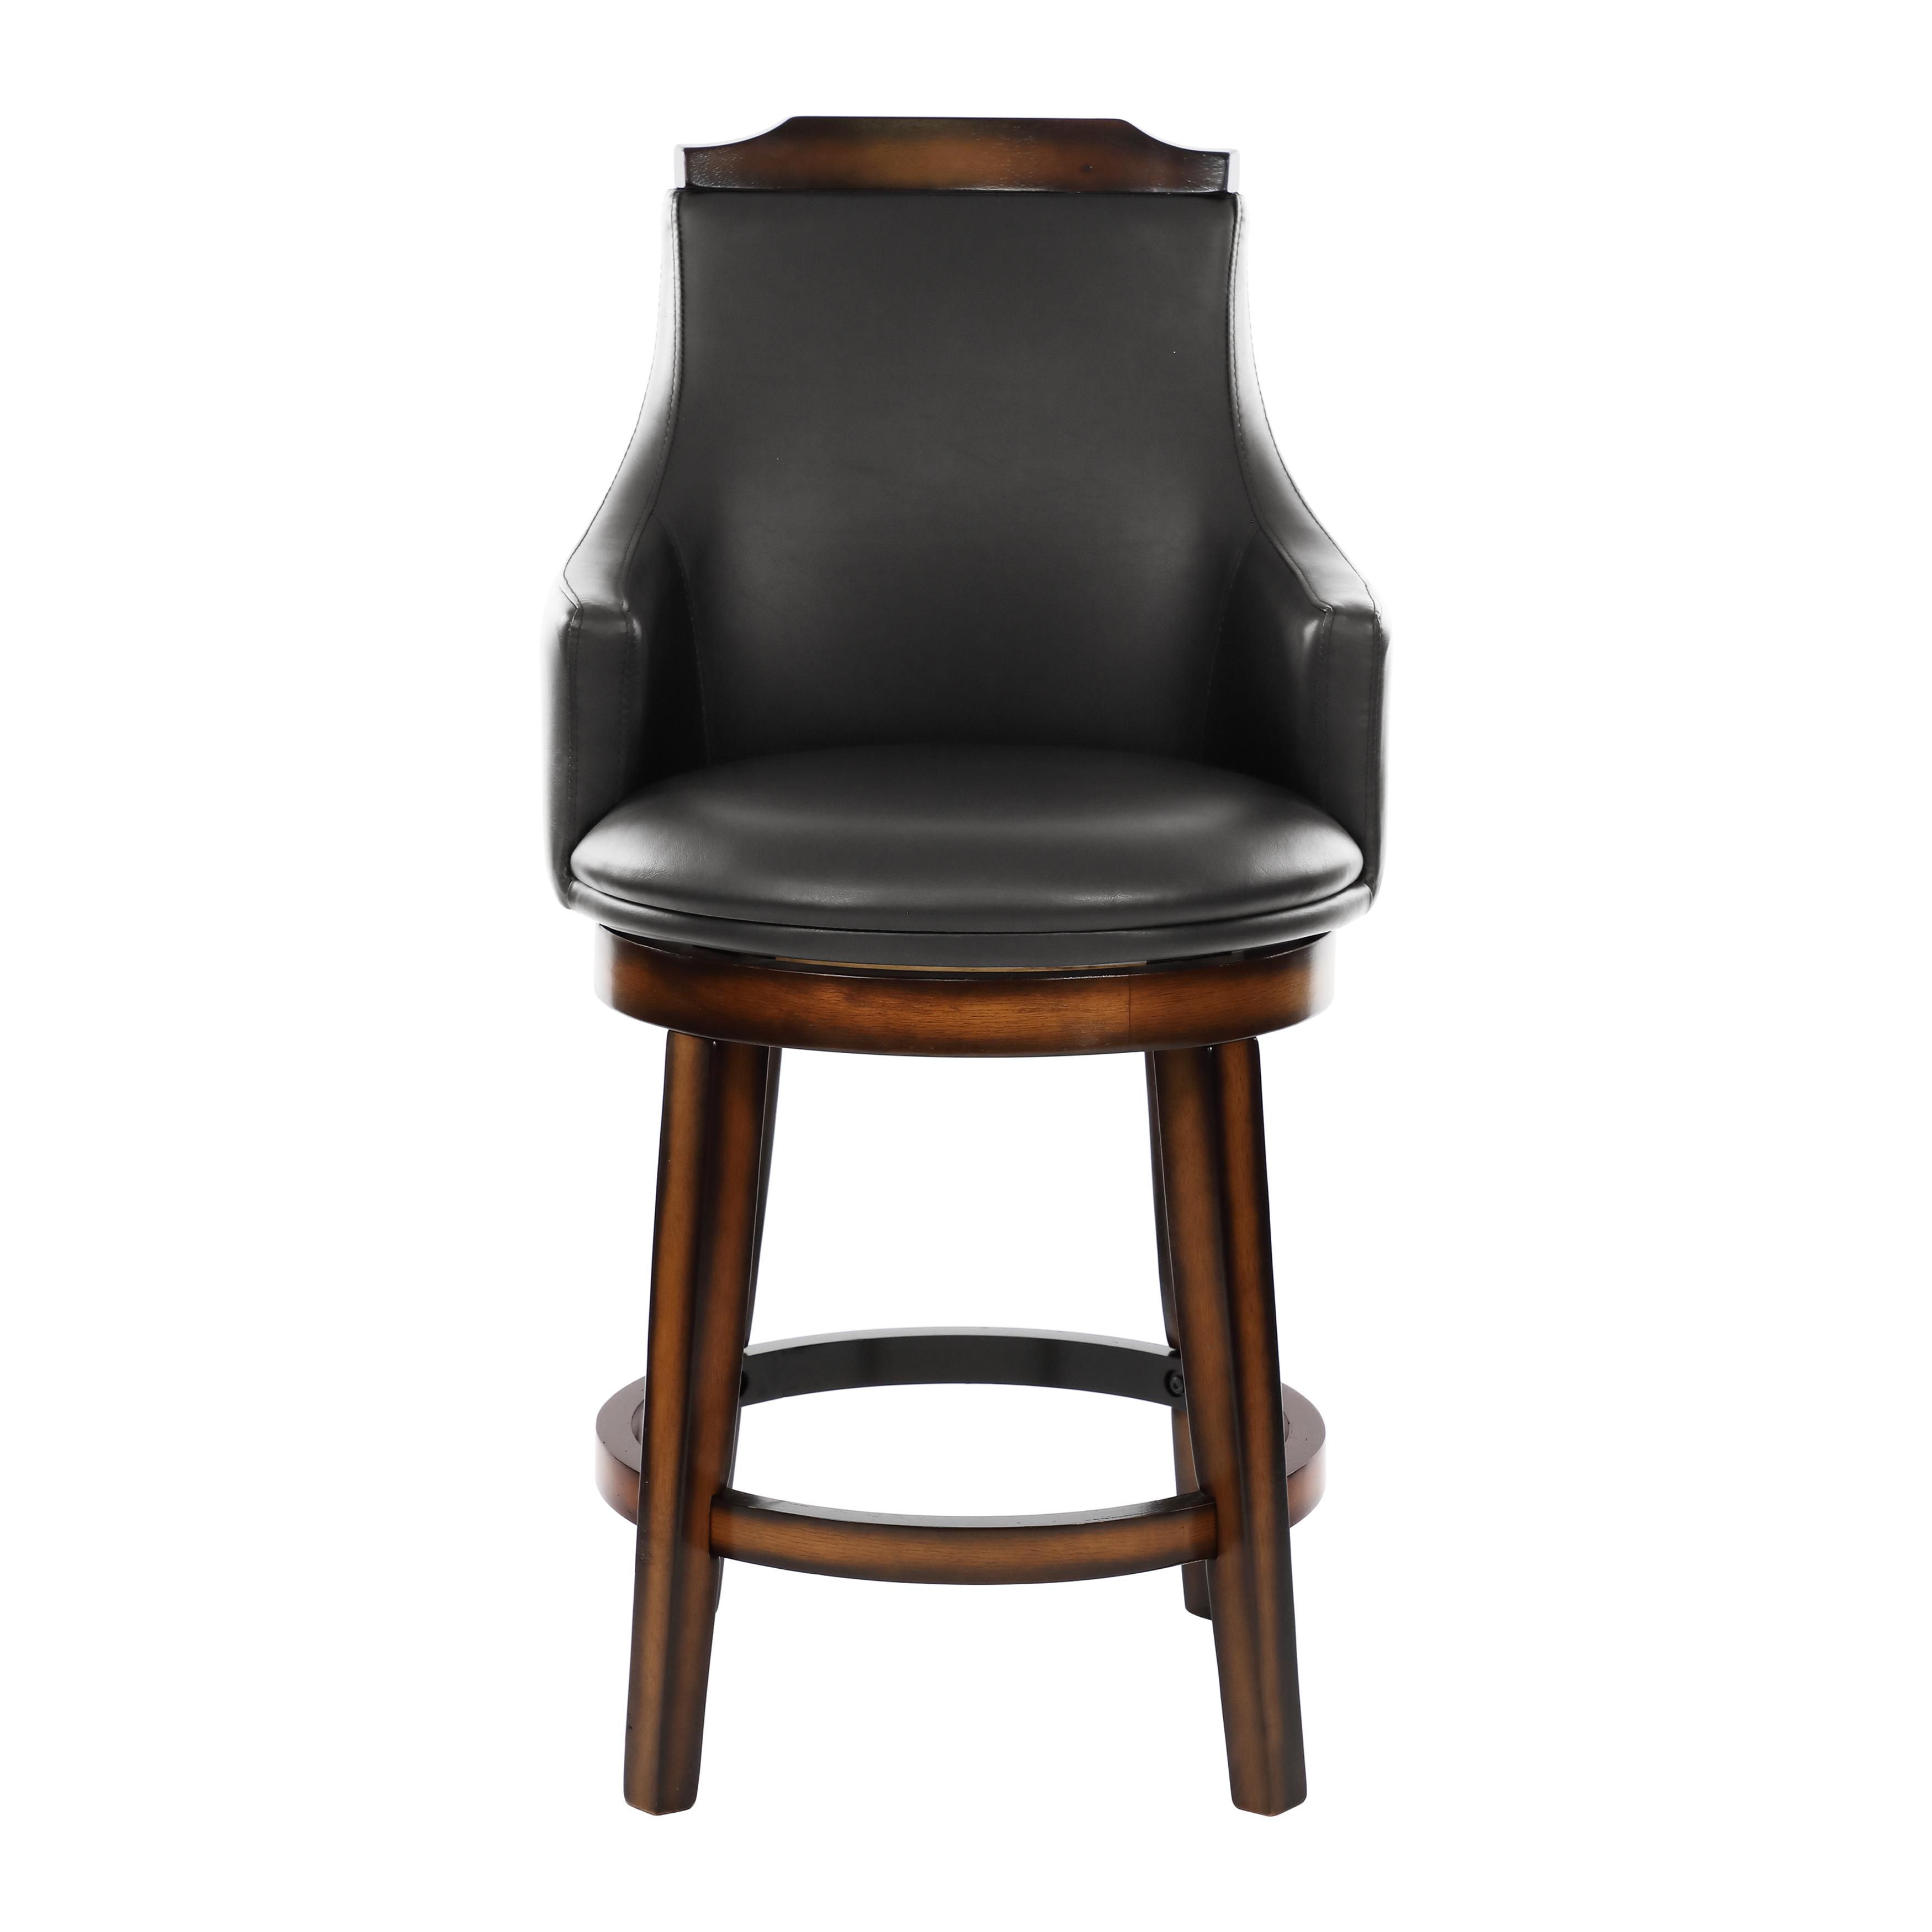 Transitional Counter Height Chair 5447-24S Bayshore 5447-24S-Set-2 in Oak, Dark Brown Faux Leather